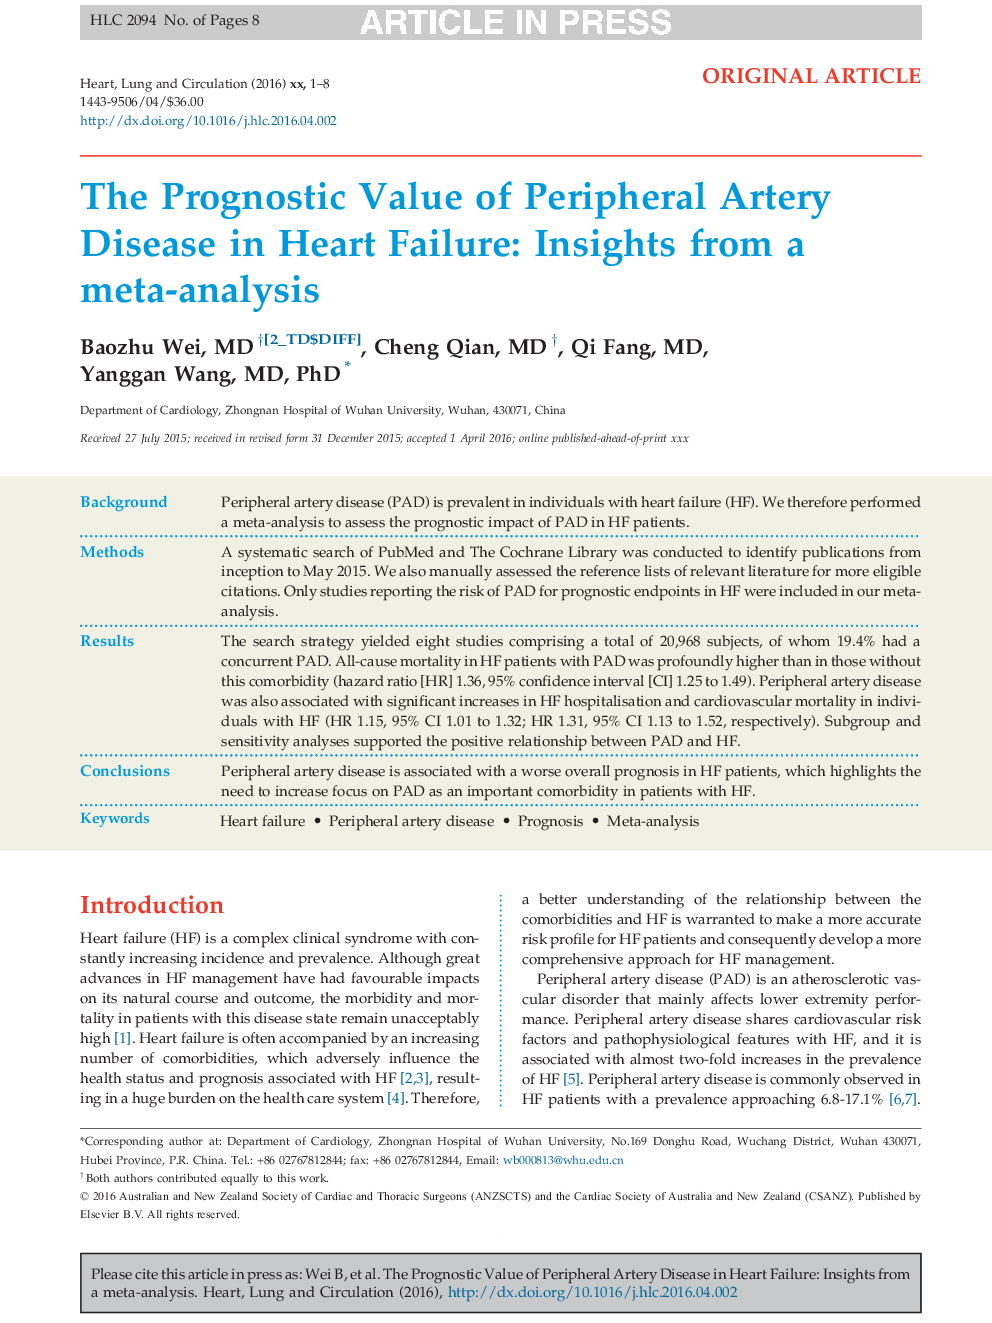 The Prognostic Value of Peripheral Artery Disease in Heart Failure: Insights from a Meta-analysis